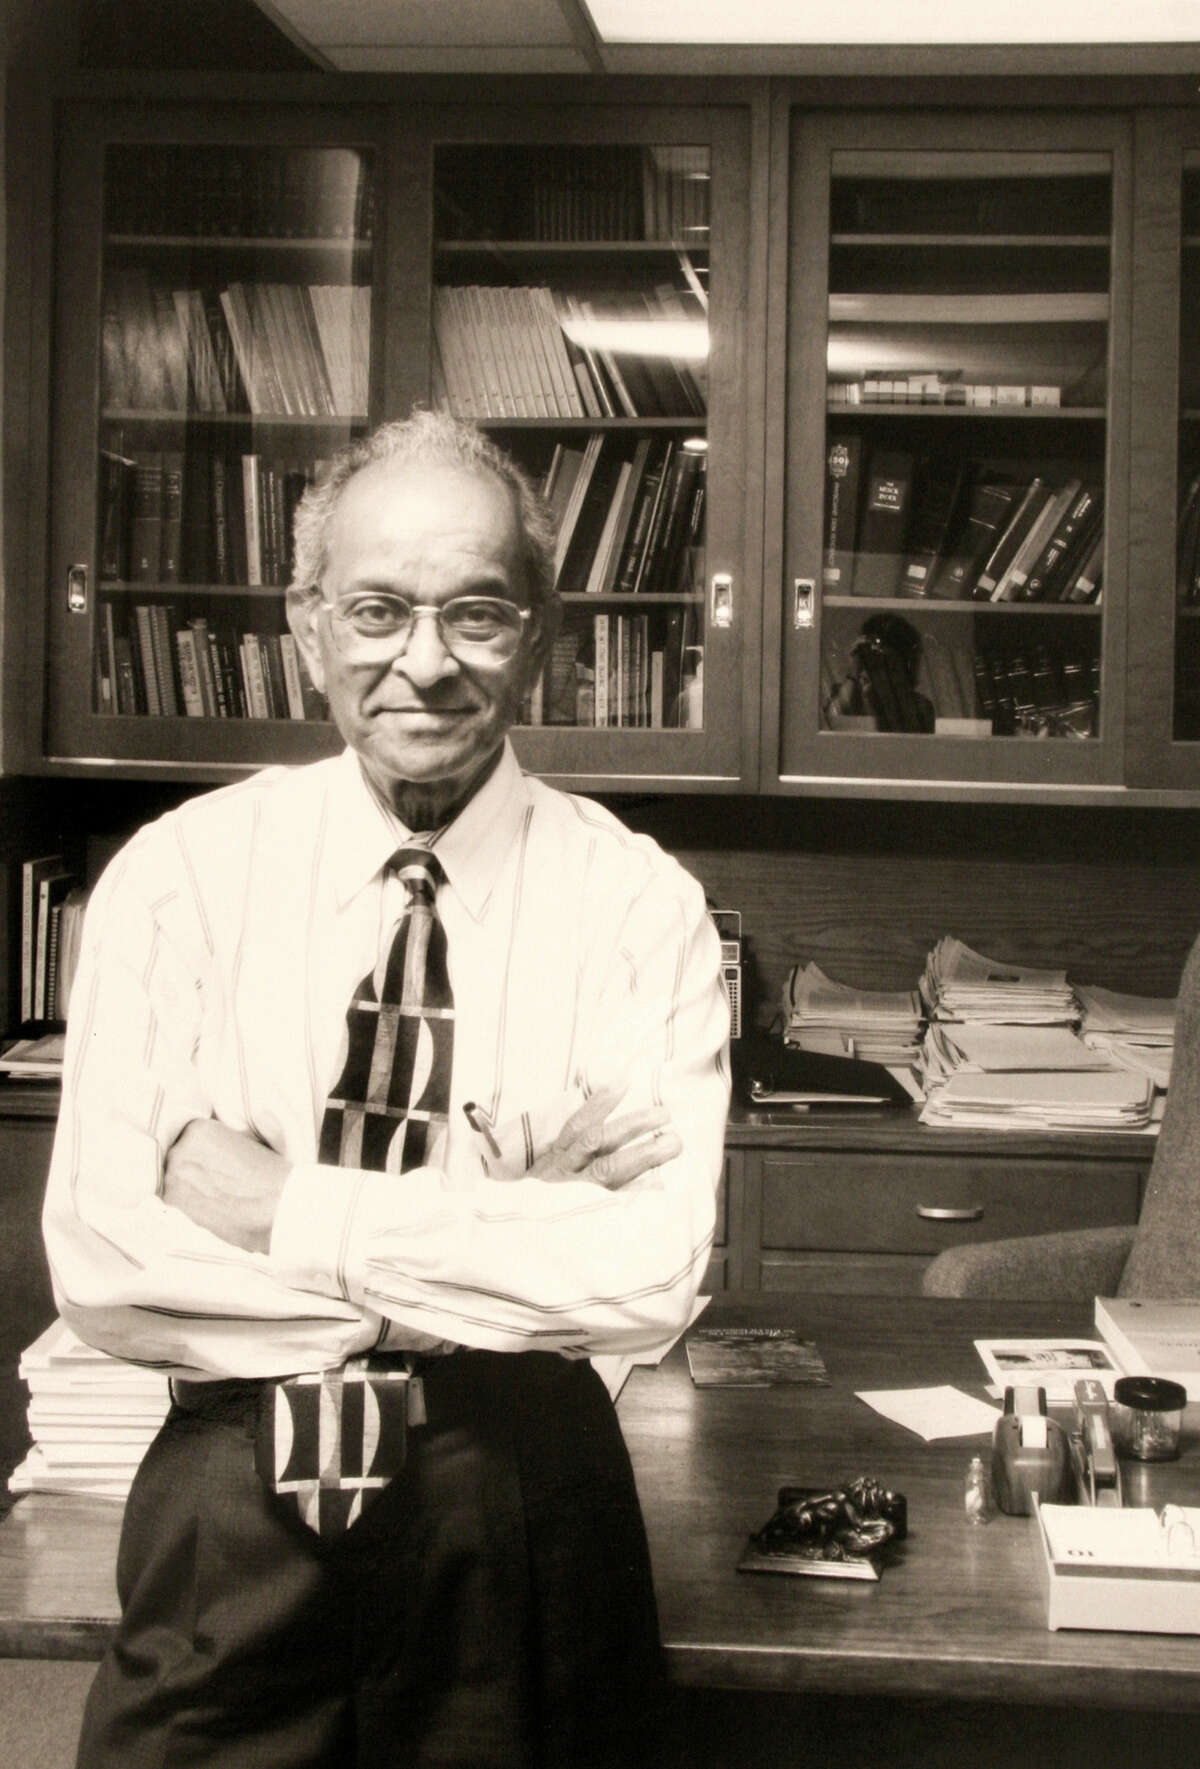 Dr. N.R. Pemmaraju researched steroids and was well known in the Indian community.